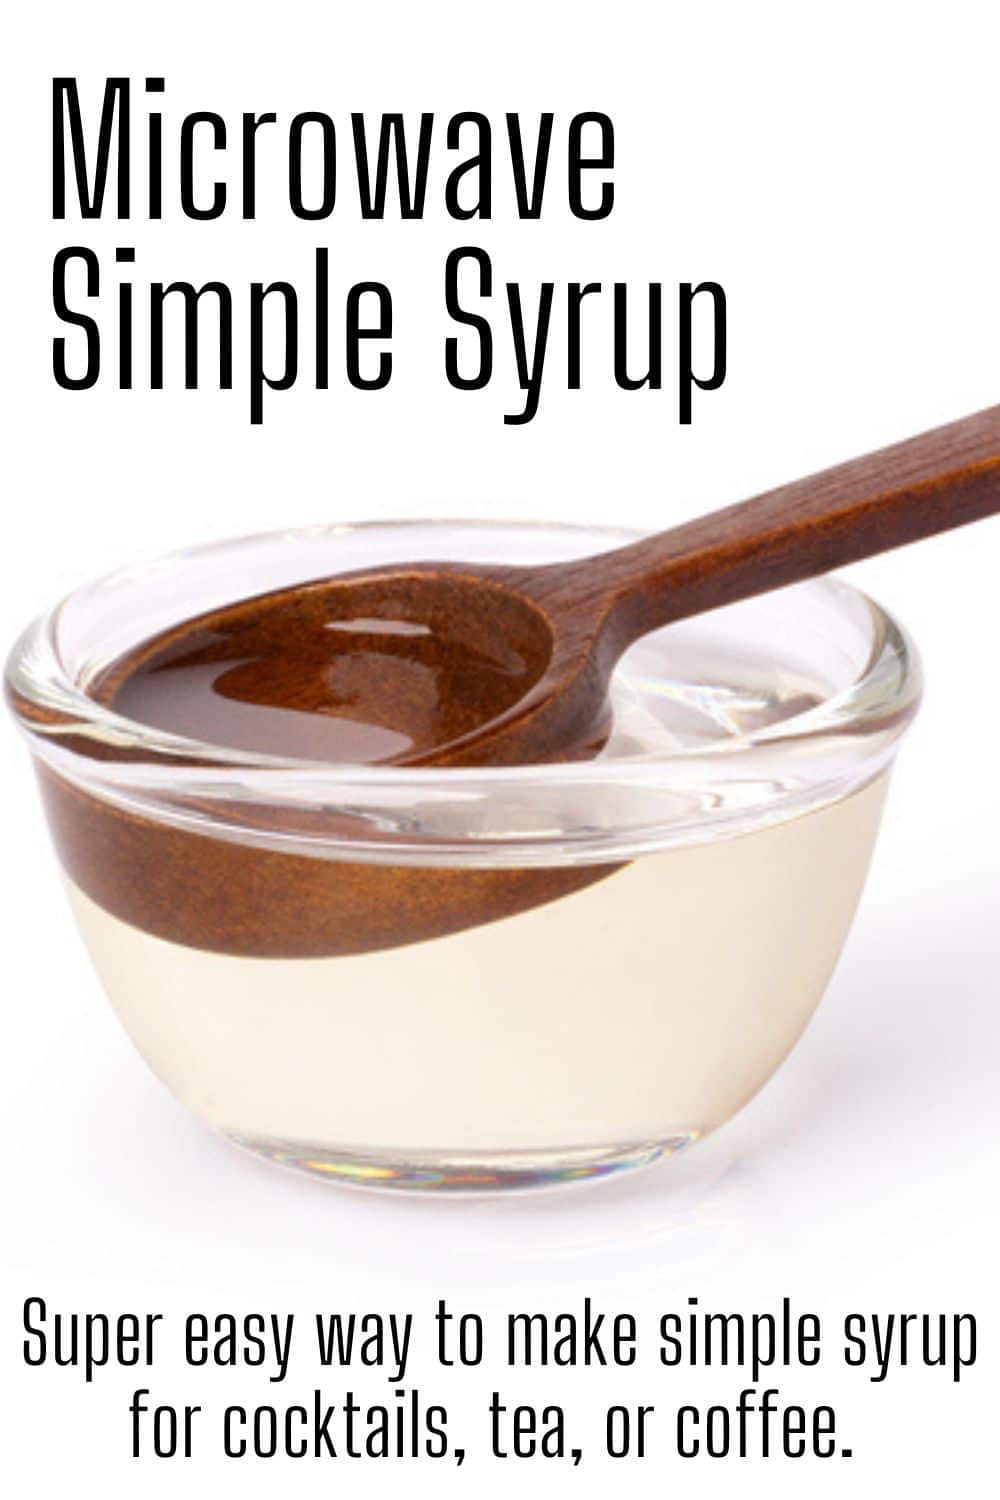 Simple Syrup in the microwave pin image with text overlay